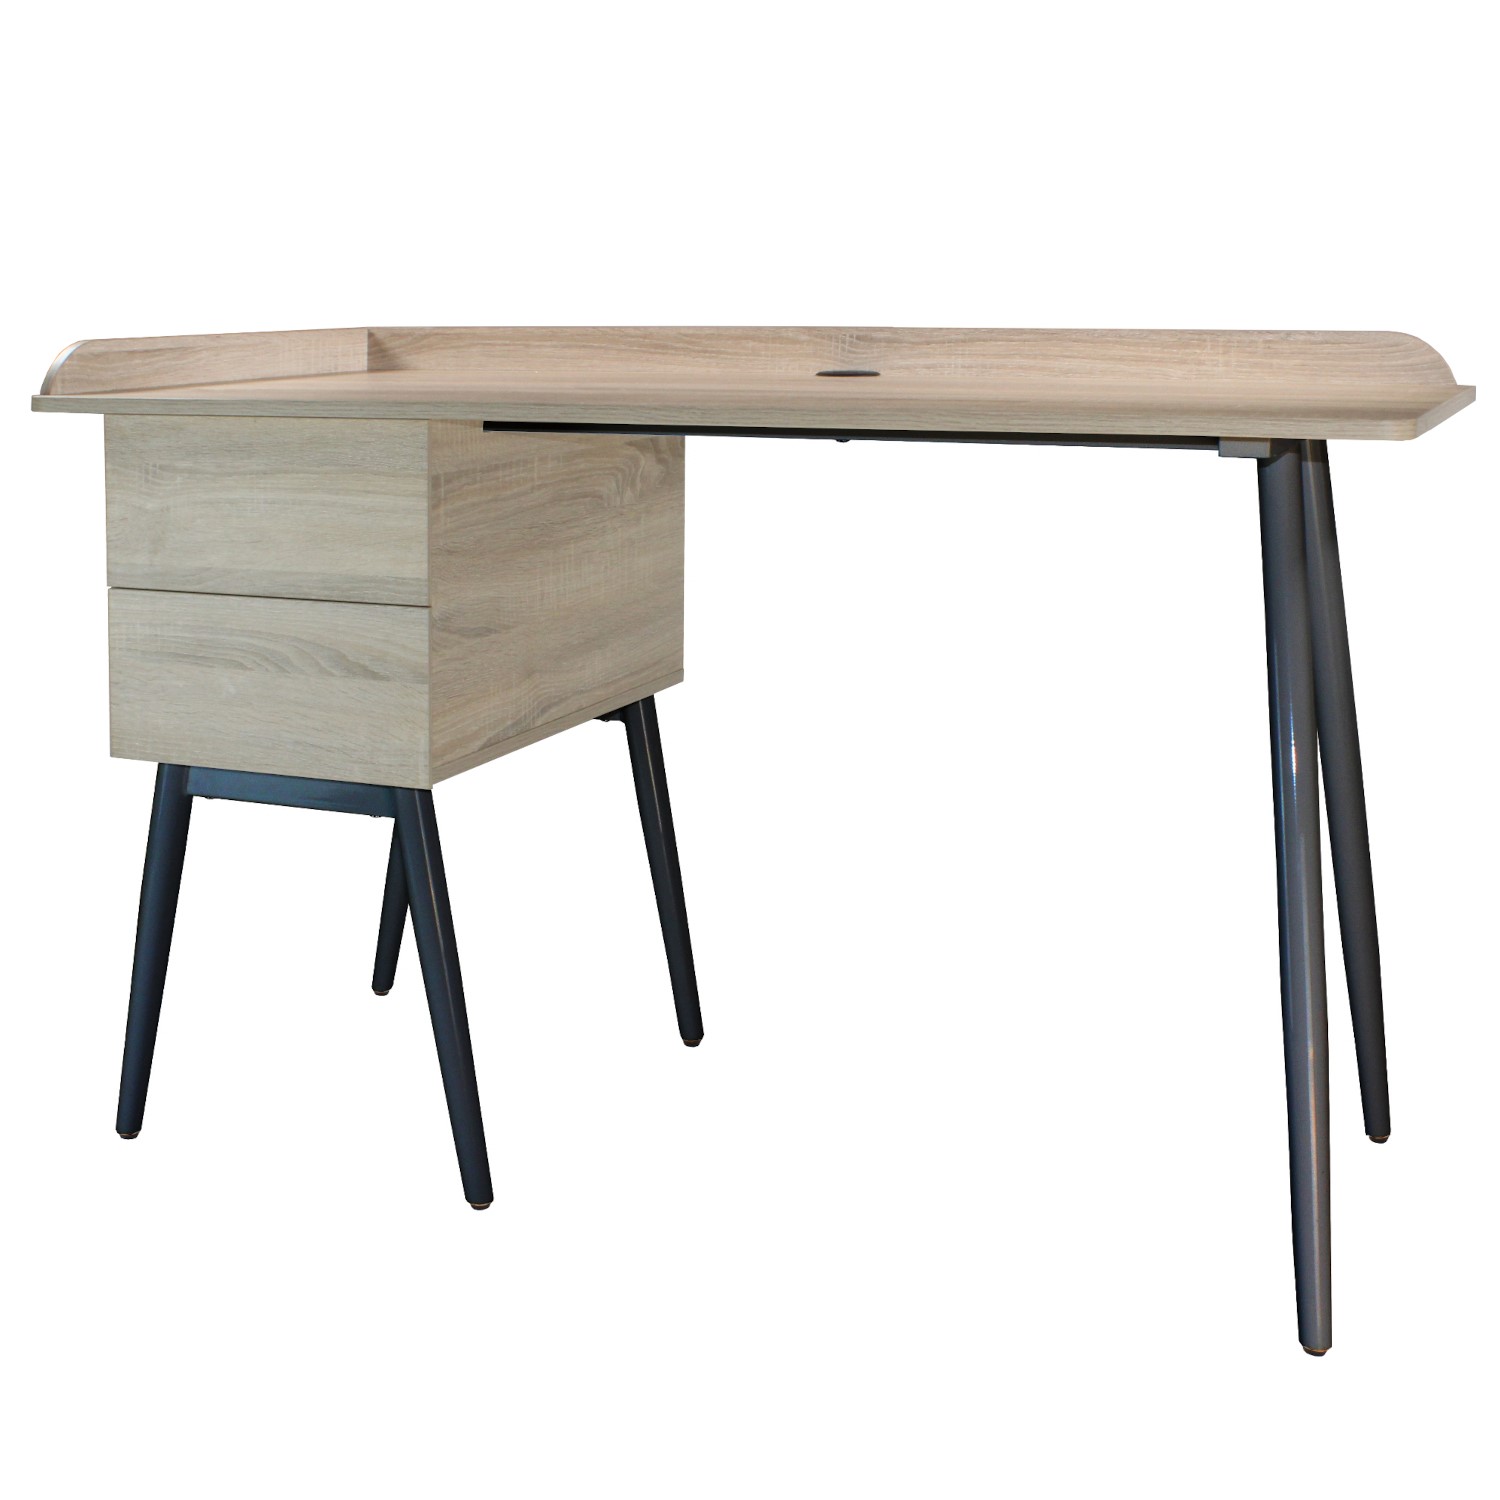 Read more about Light oak office desk with 2 drawers denver